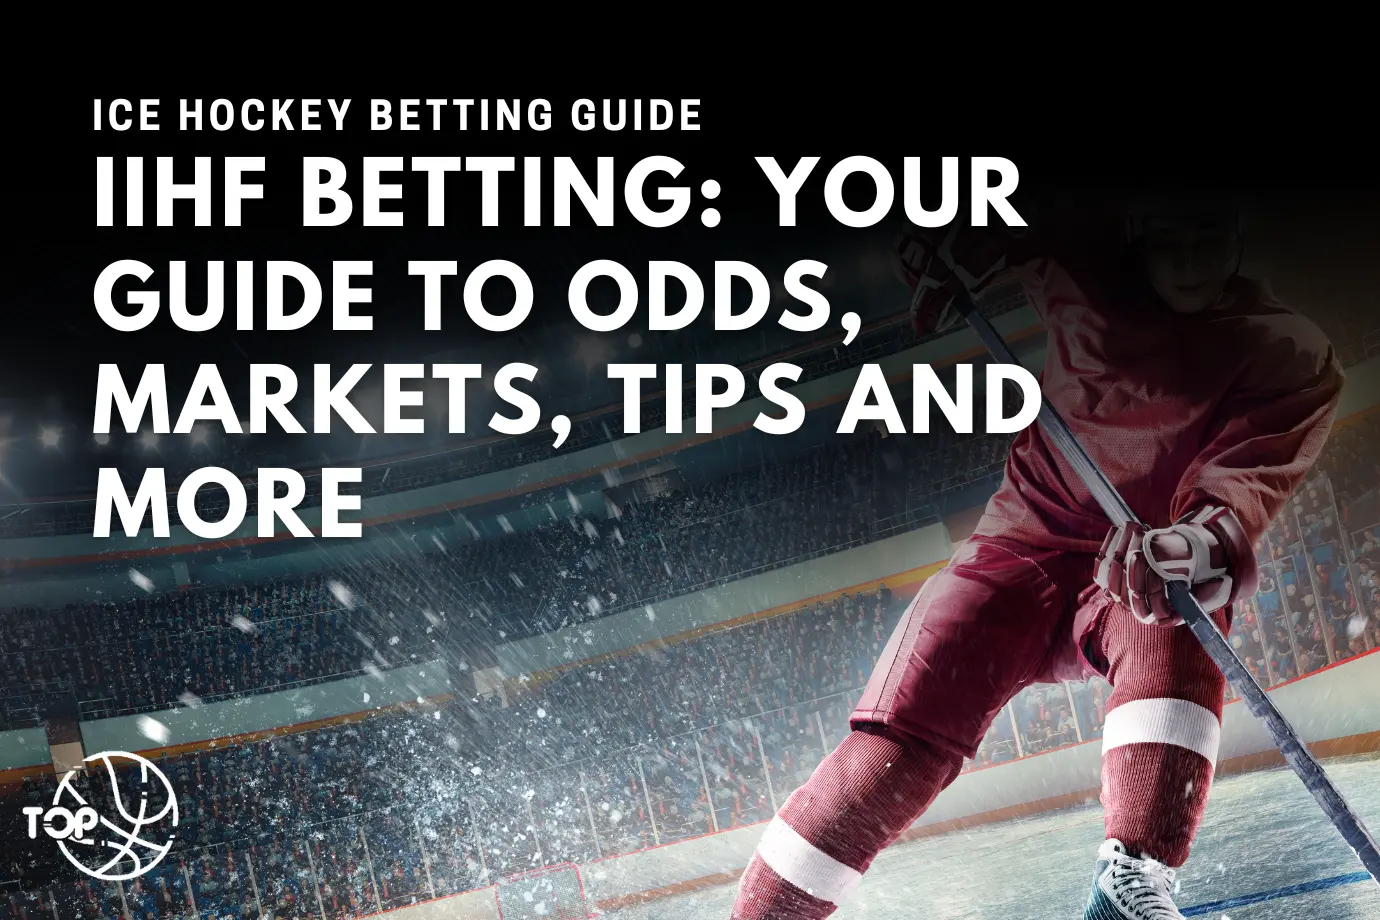 IIHF Betting: Your Guide to Odds, Markets, Tips and More